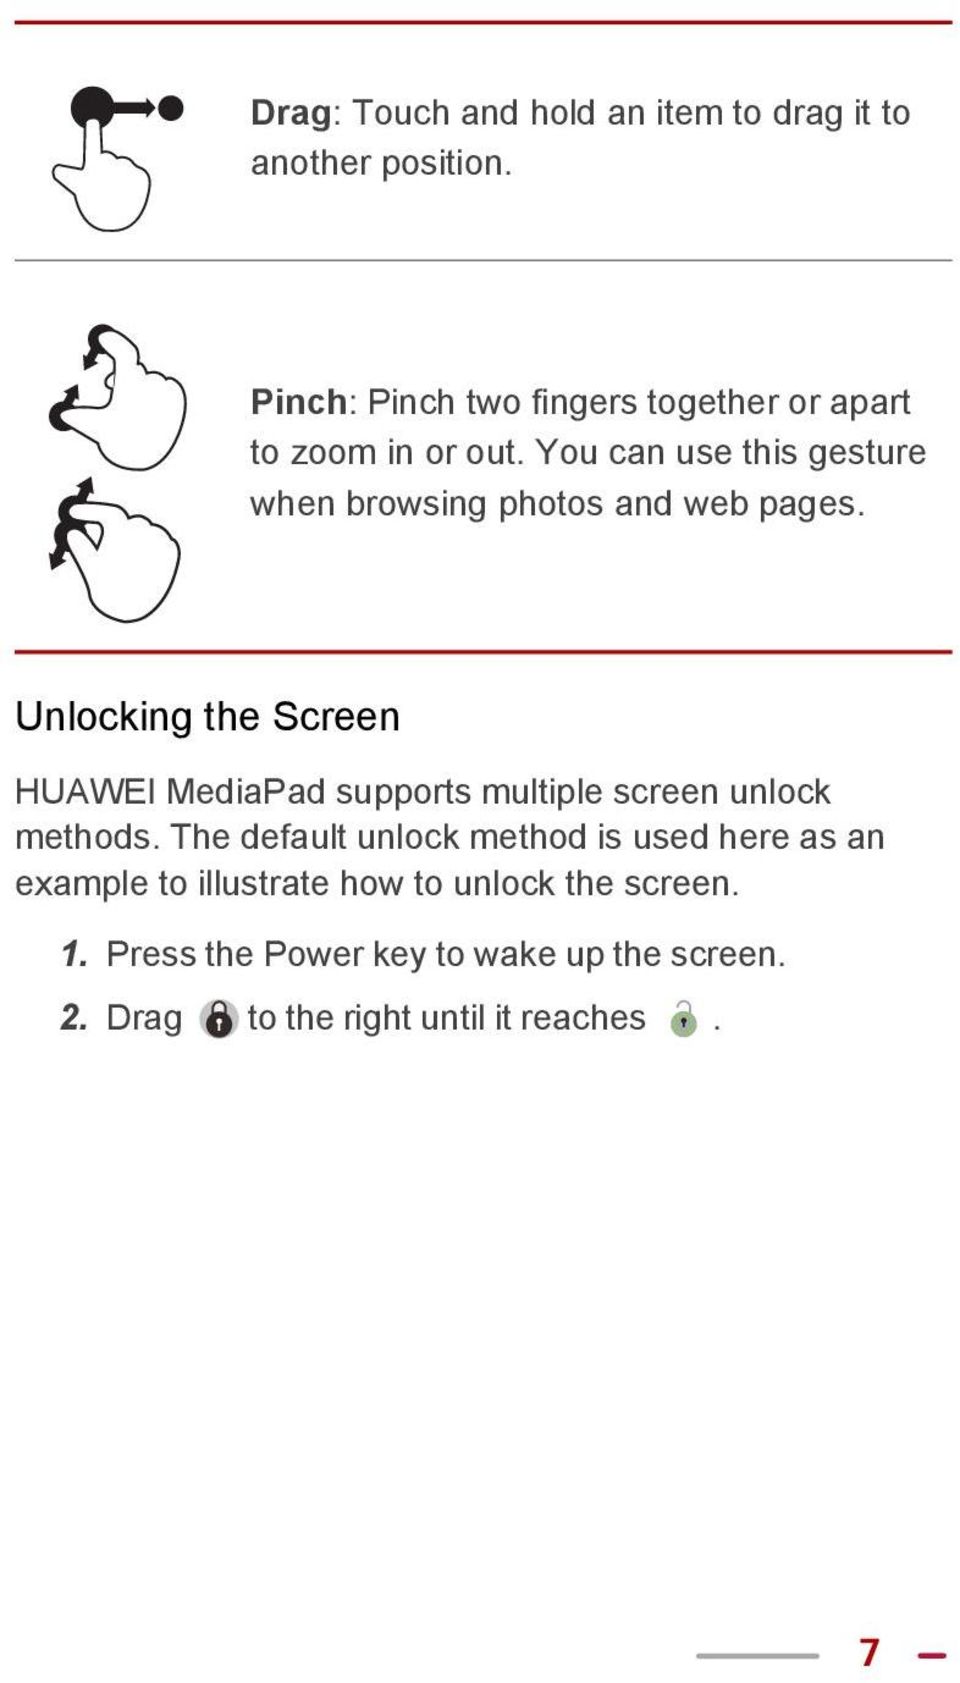 You can use this gesture when browsing photos and web pages.